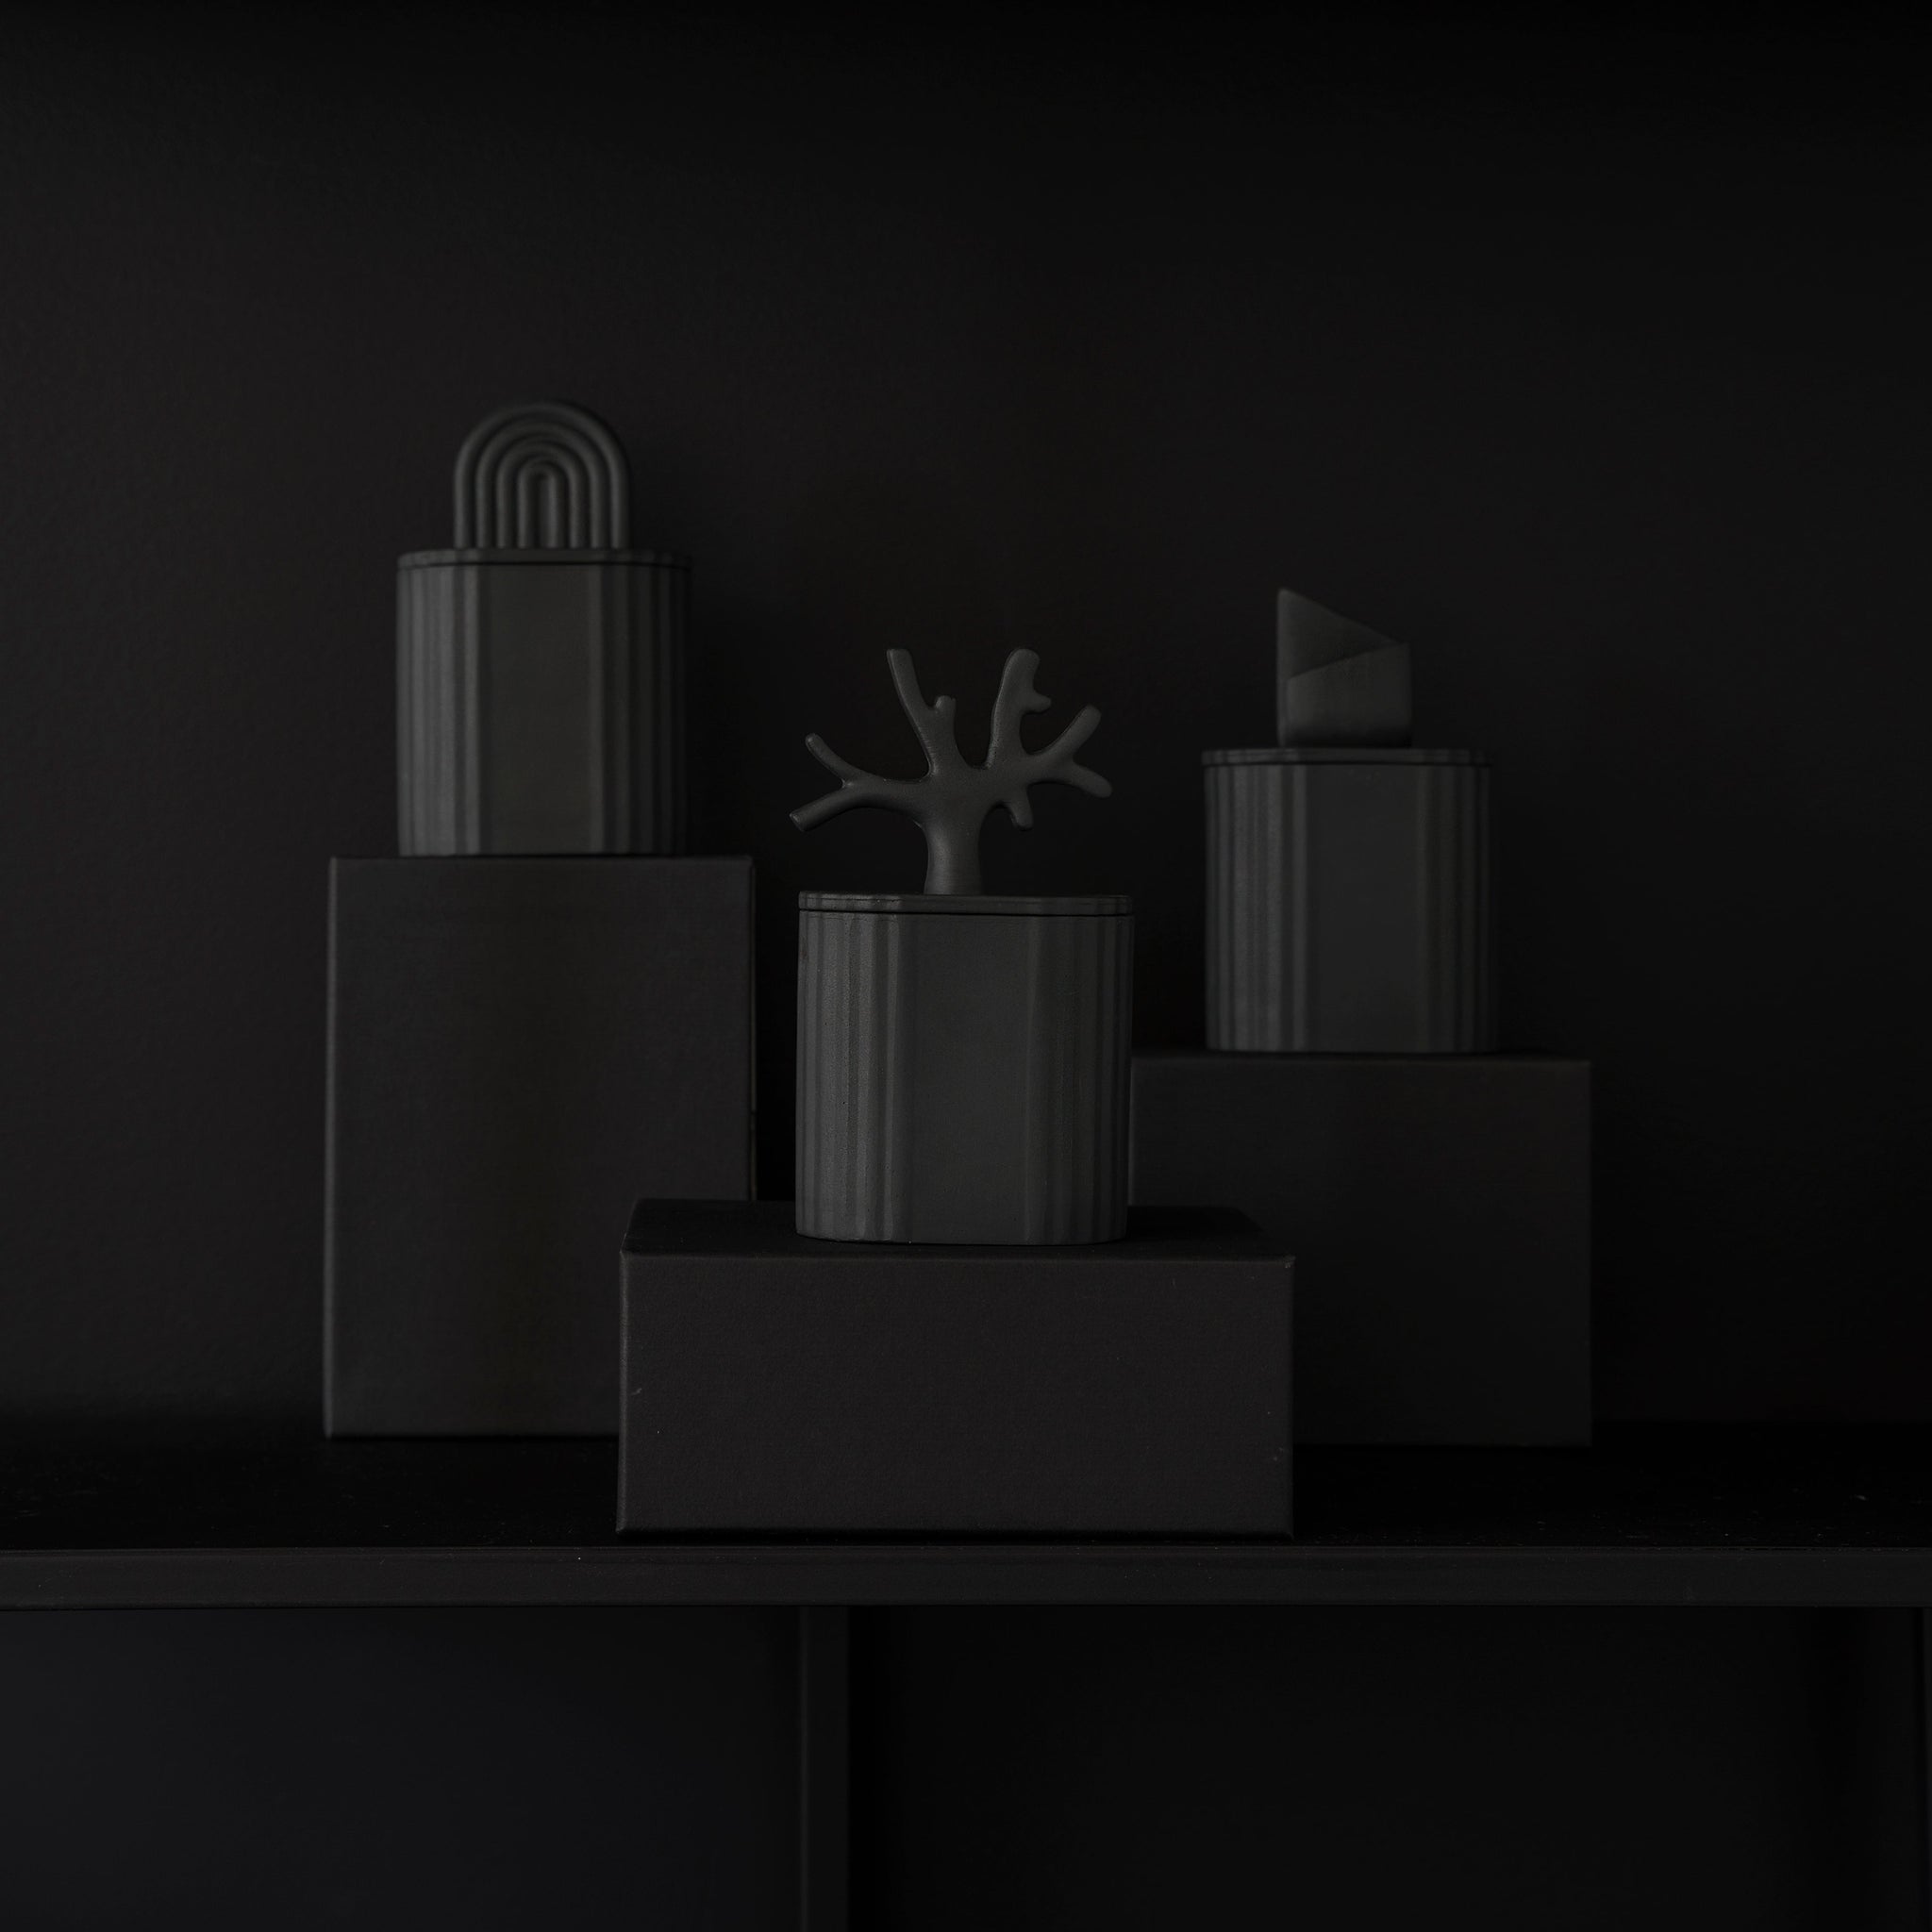 Outlet Ki Graphite Black - a container made of black porcelain